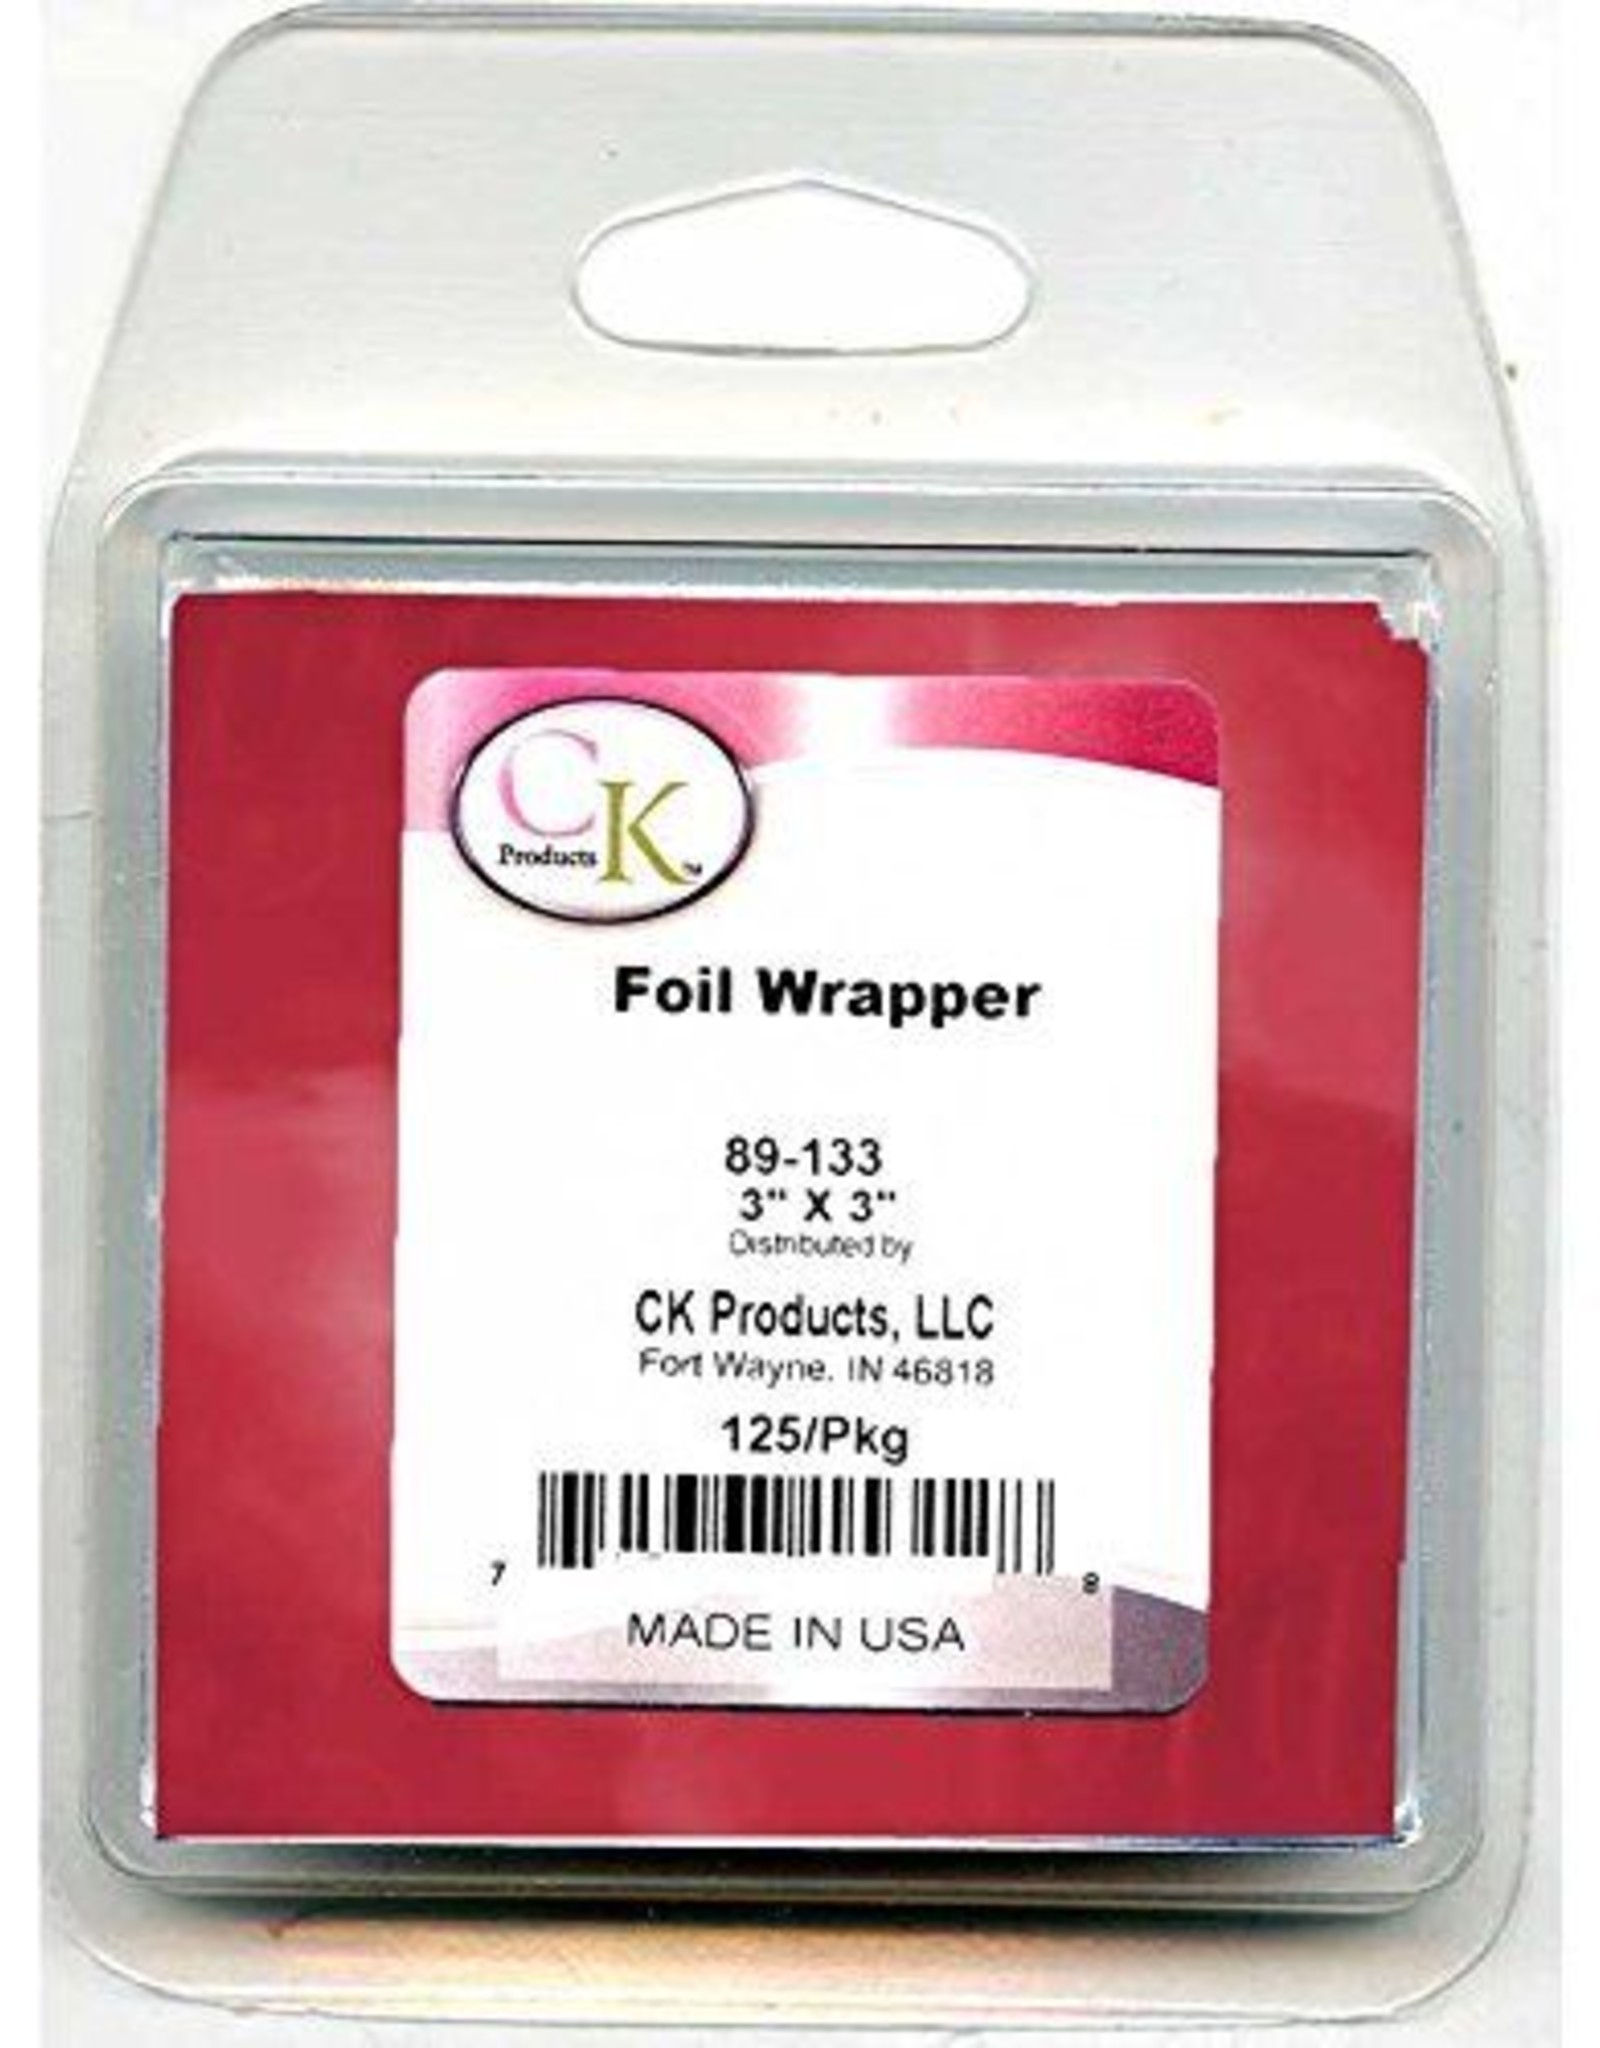 Foil Wrapper (Red 3x3)